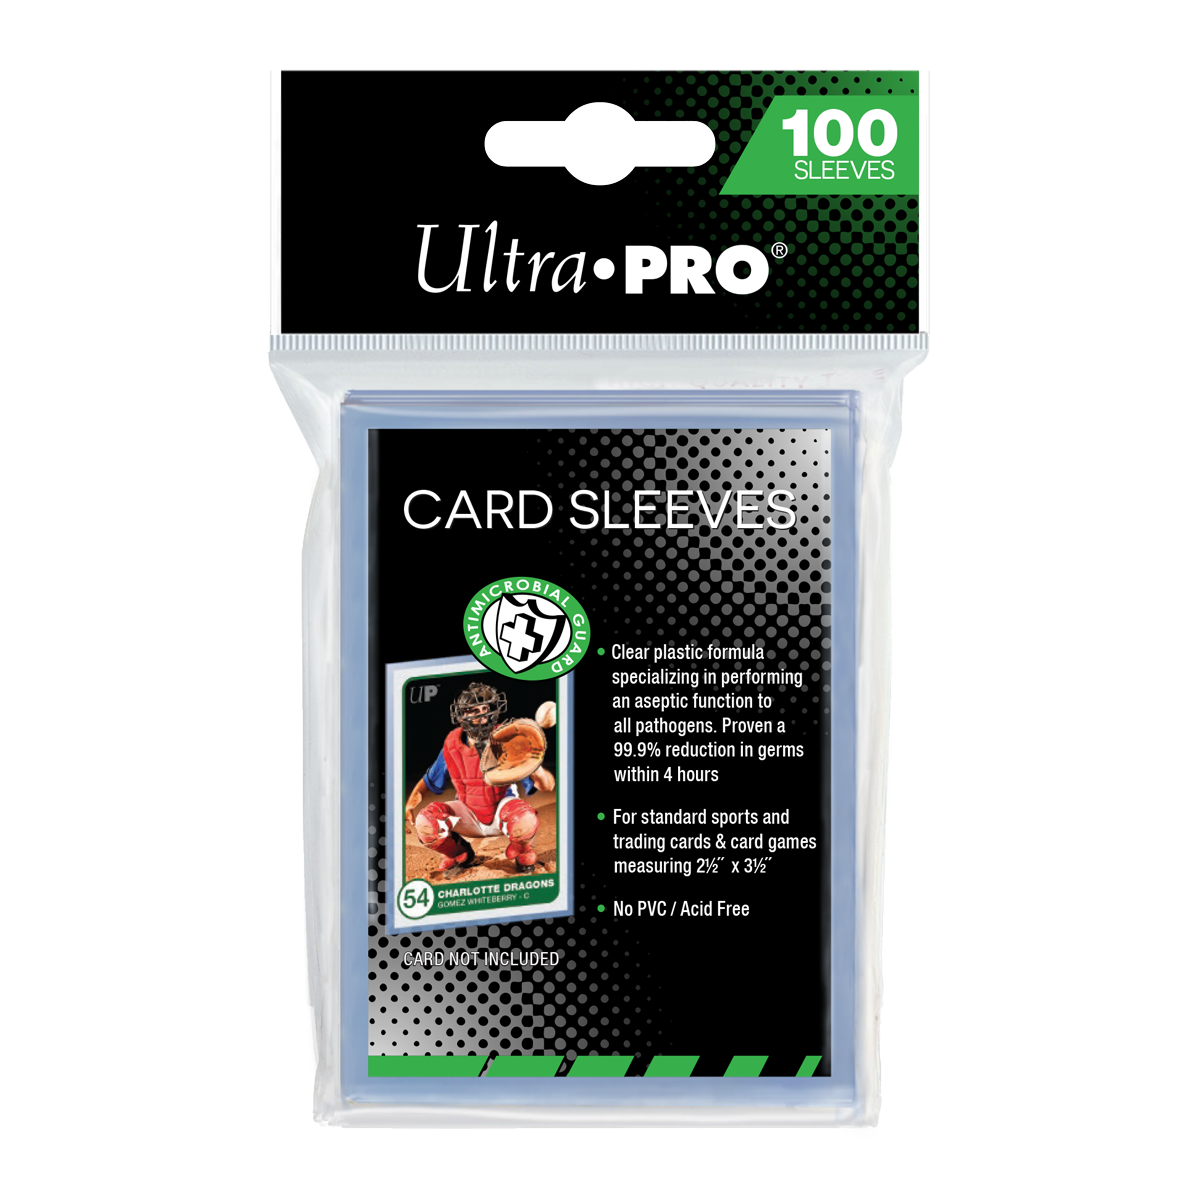 Ultra Pro 2-1/2 X 3-1/2 Premium Soft Card Sleeves 100ct Pack